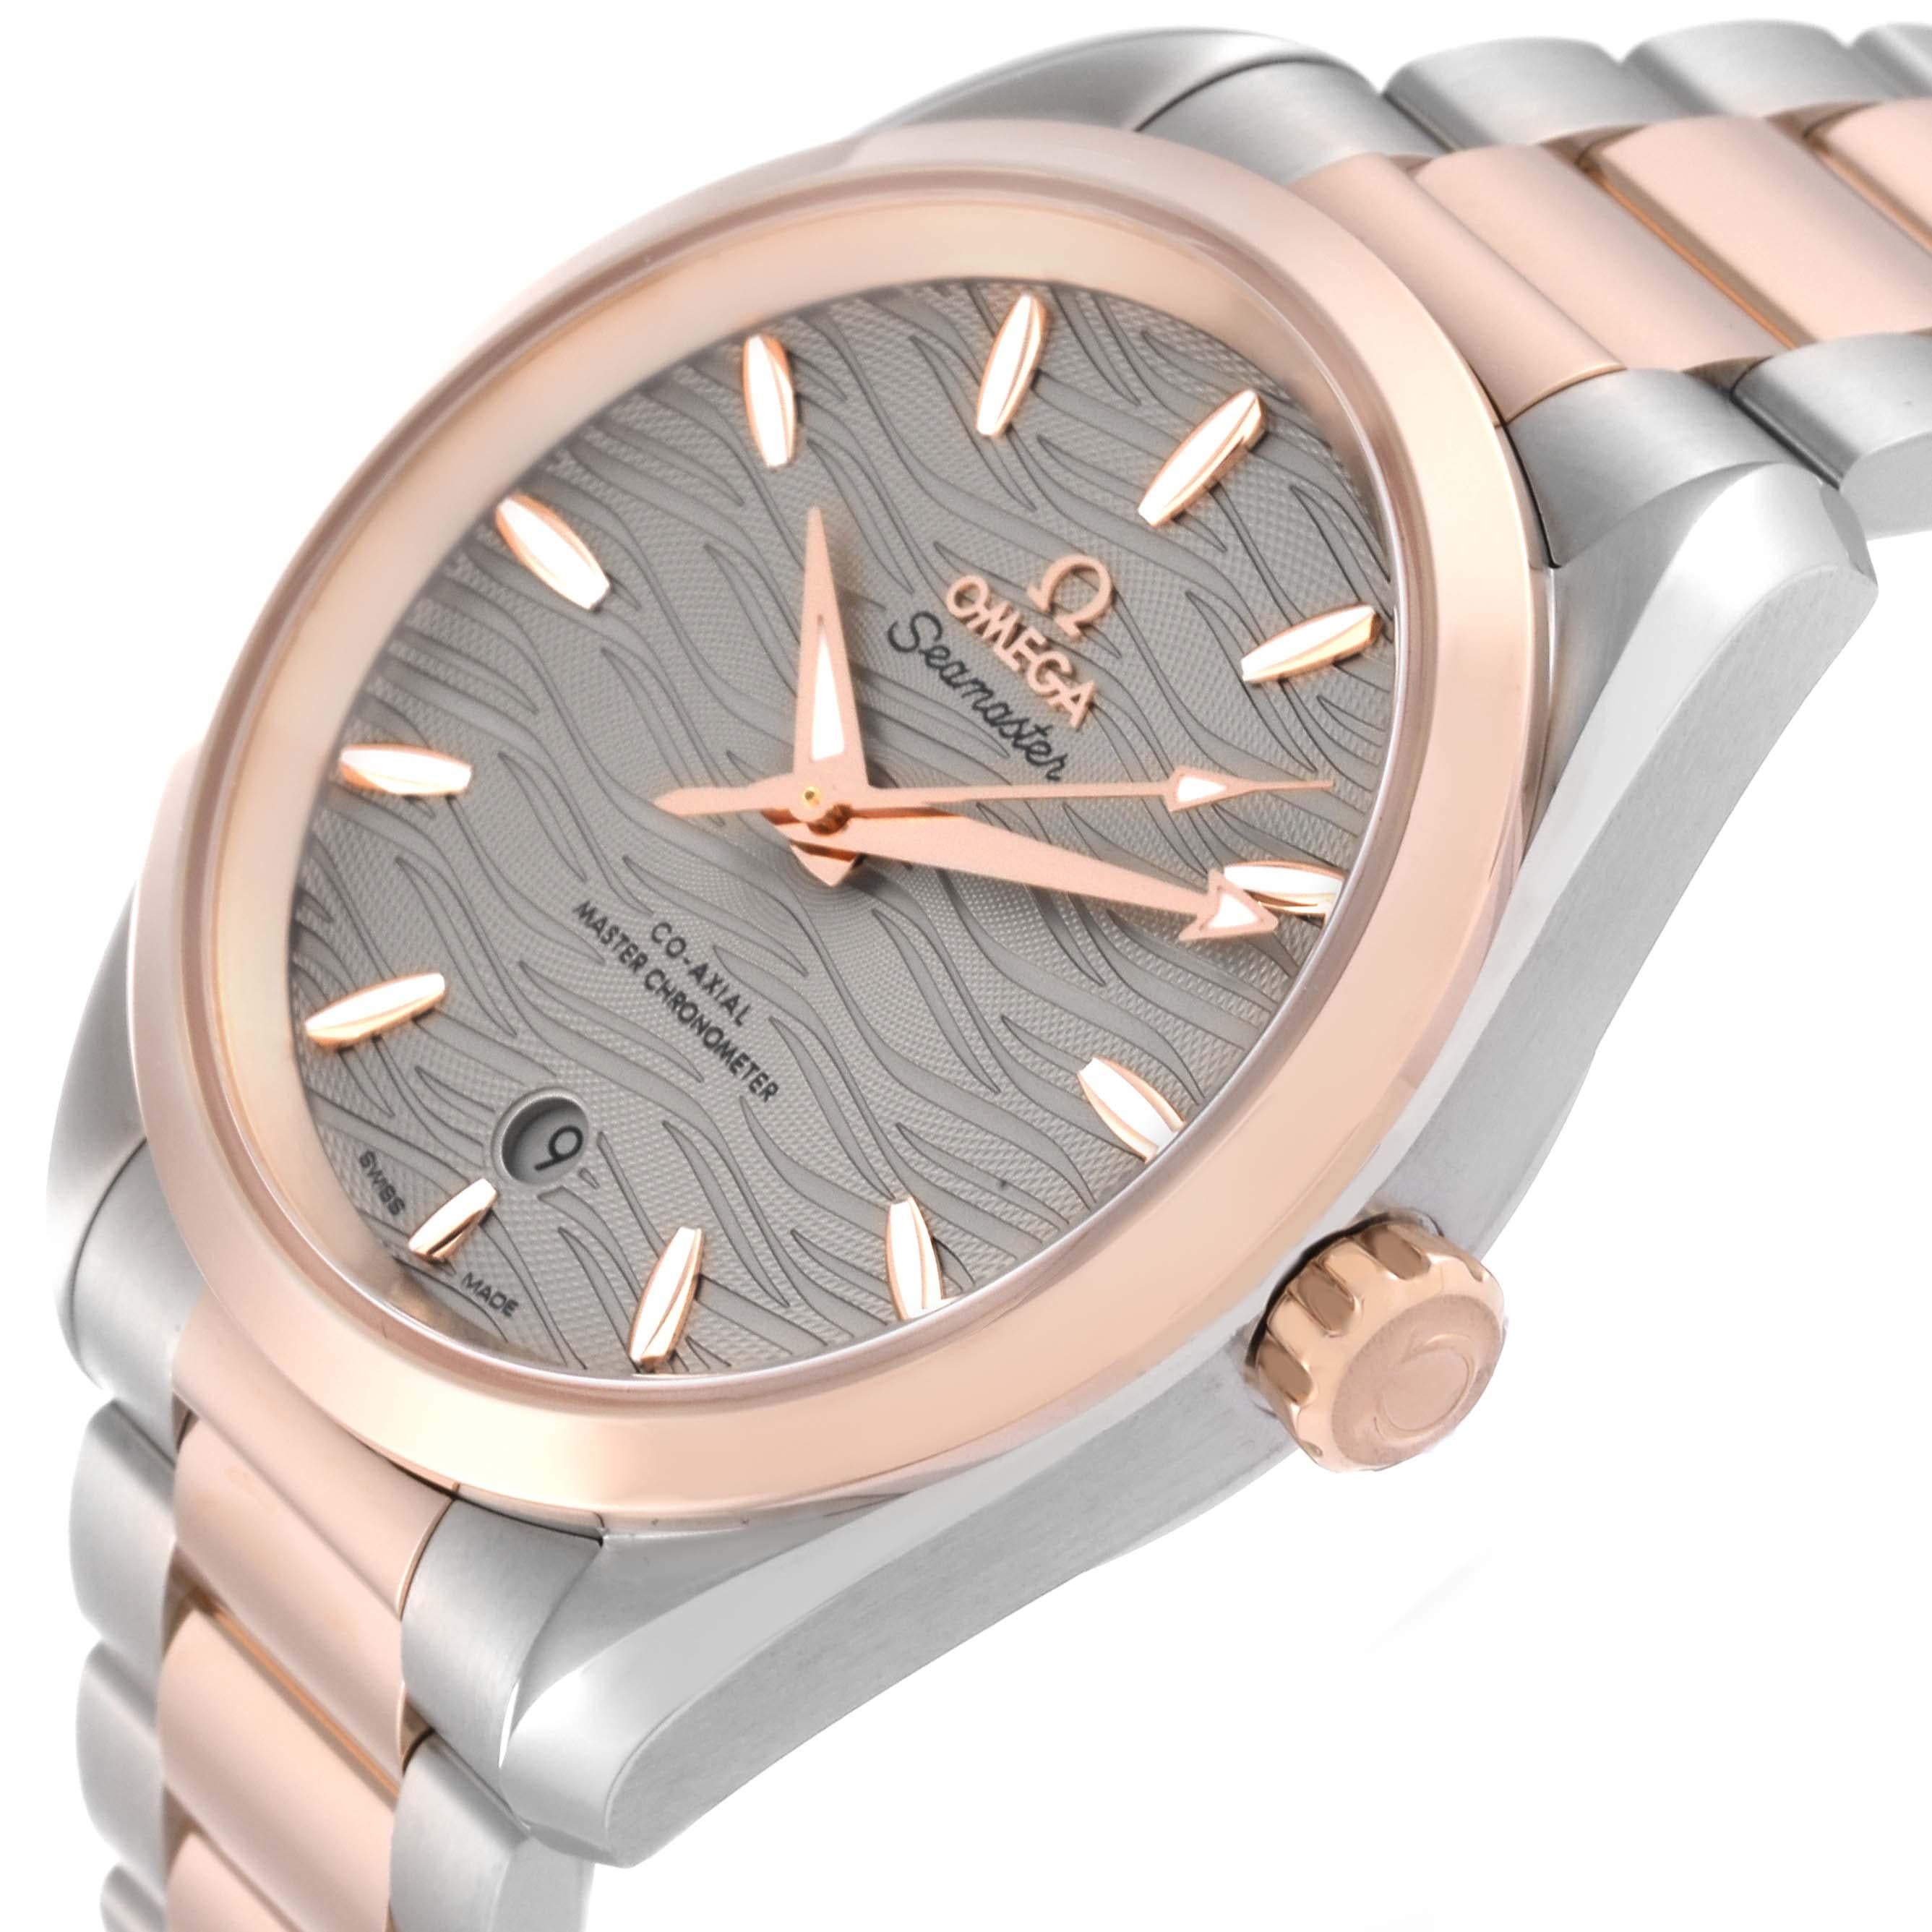 Omega Seamaster Aqua Terra Steel Rose Gold Watch 220.20.38.20.06.001 Box Card In Excellent Condition For Sale In Atlanta, GA